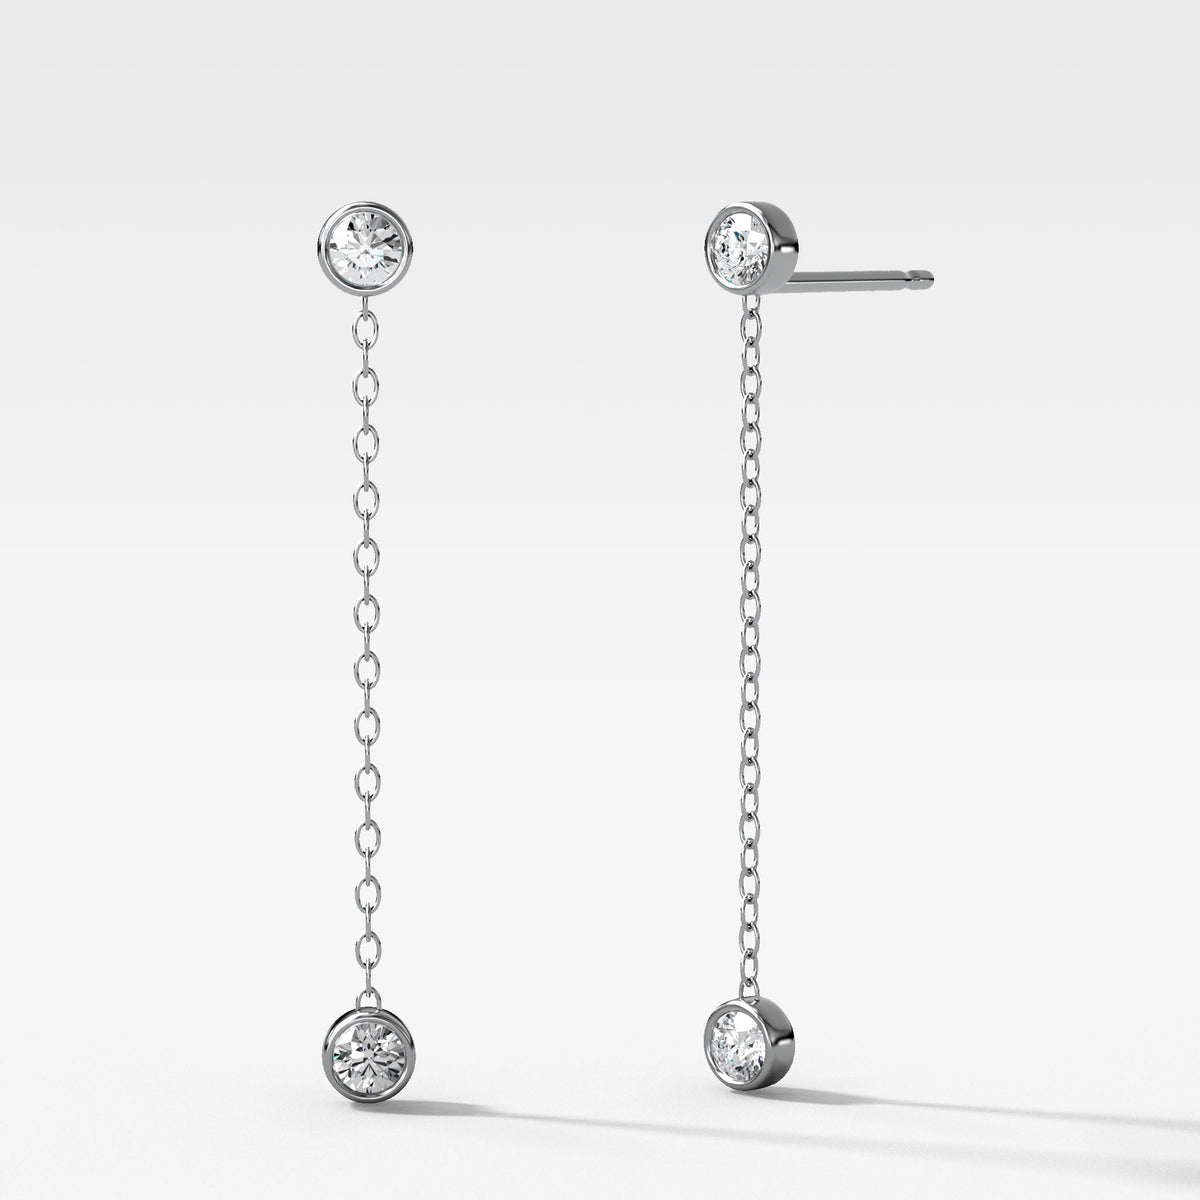 Diamond Drop Chain Earrings in White Gold by Good Stone